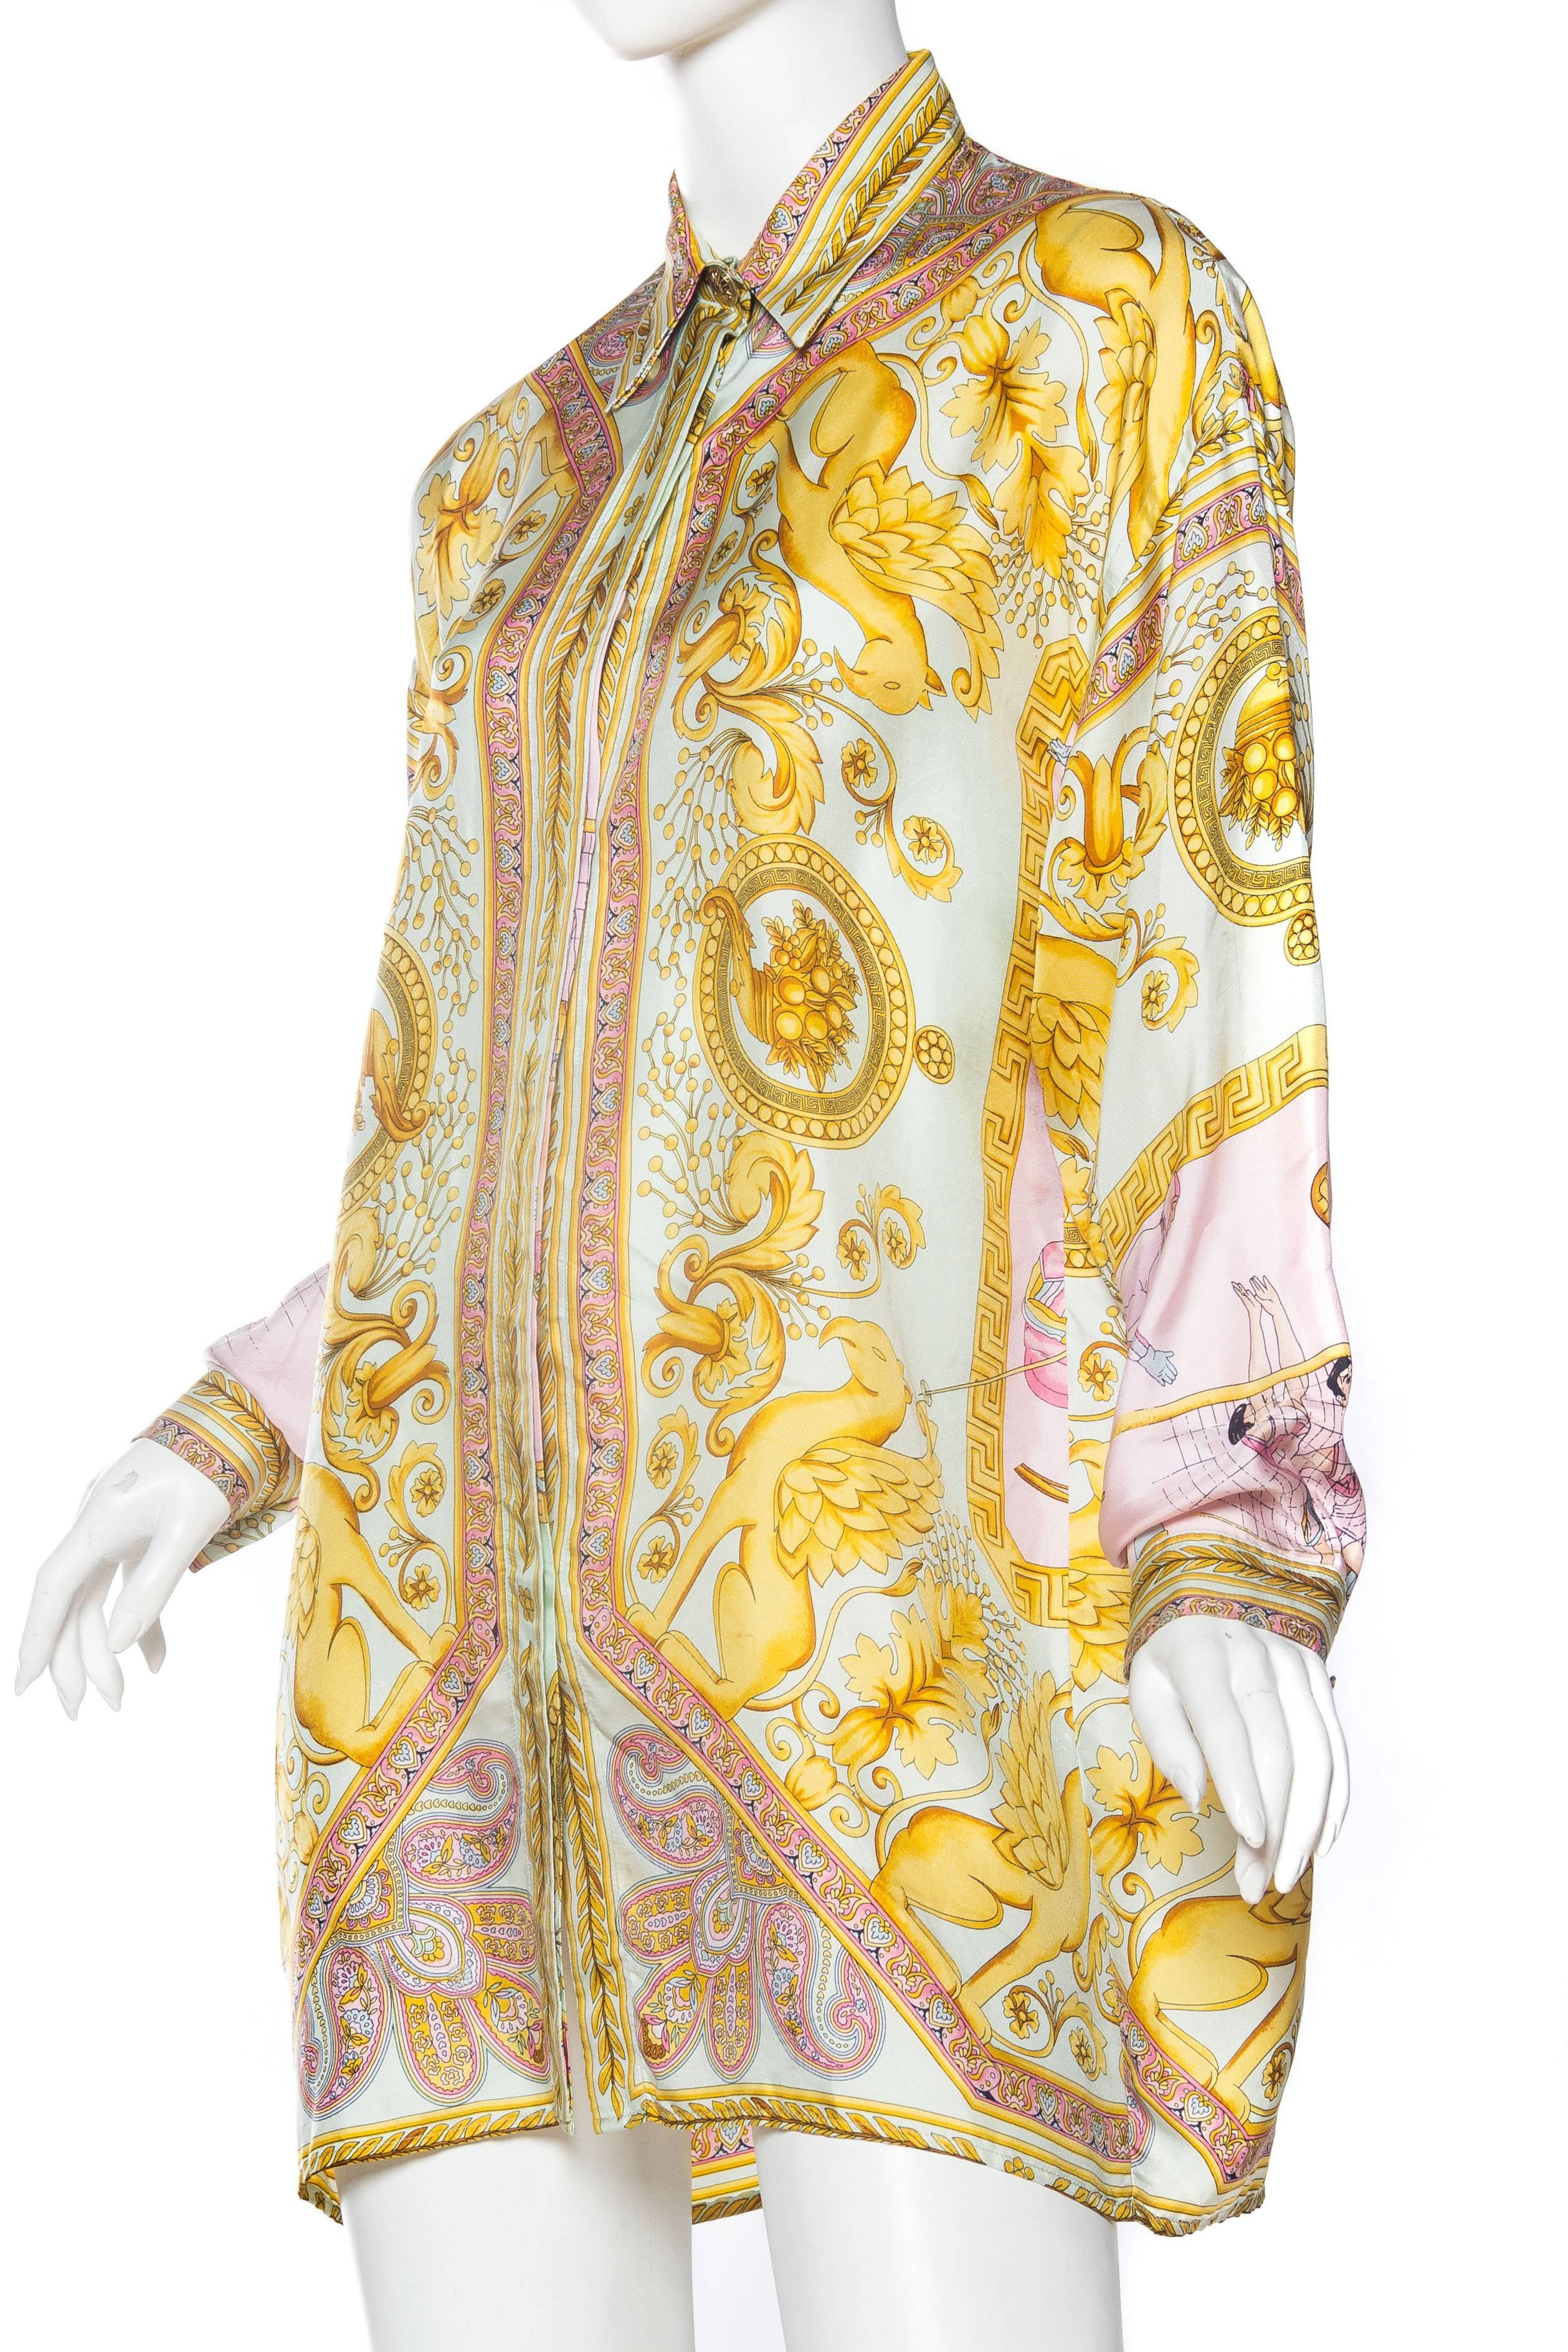 1990s Gianni Versace Gold Baroque Print Blouse 2